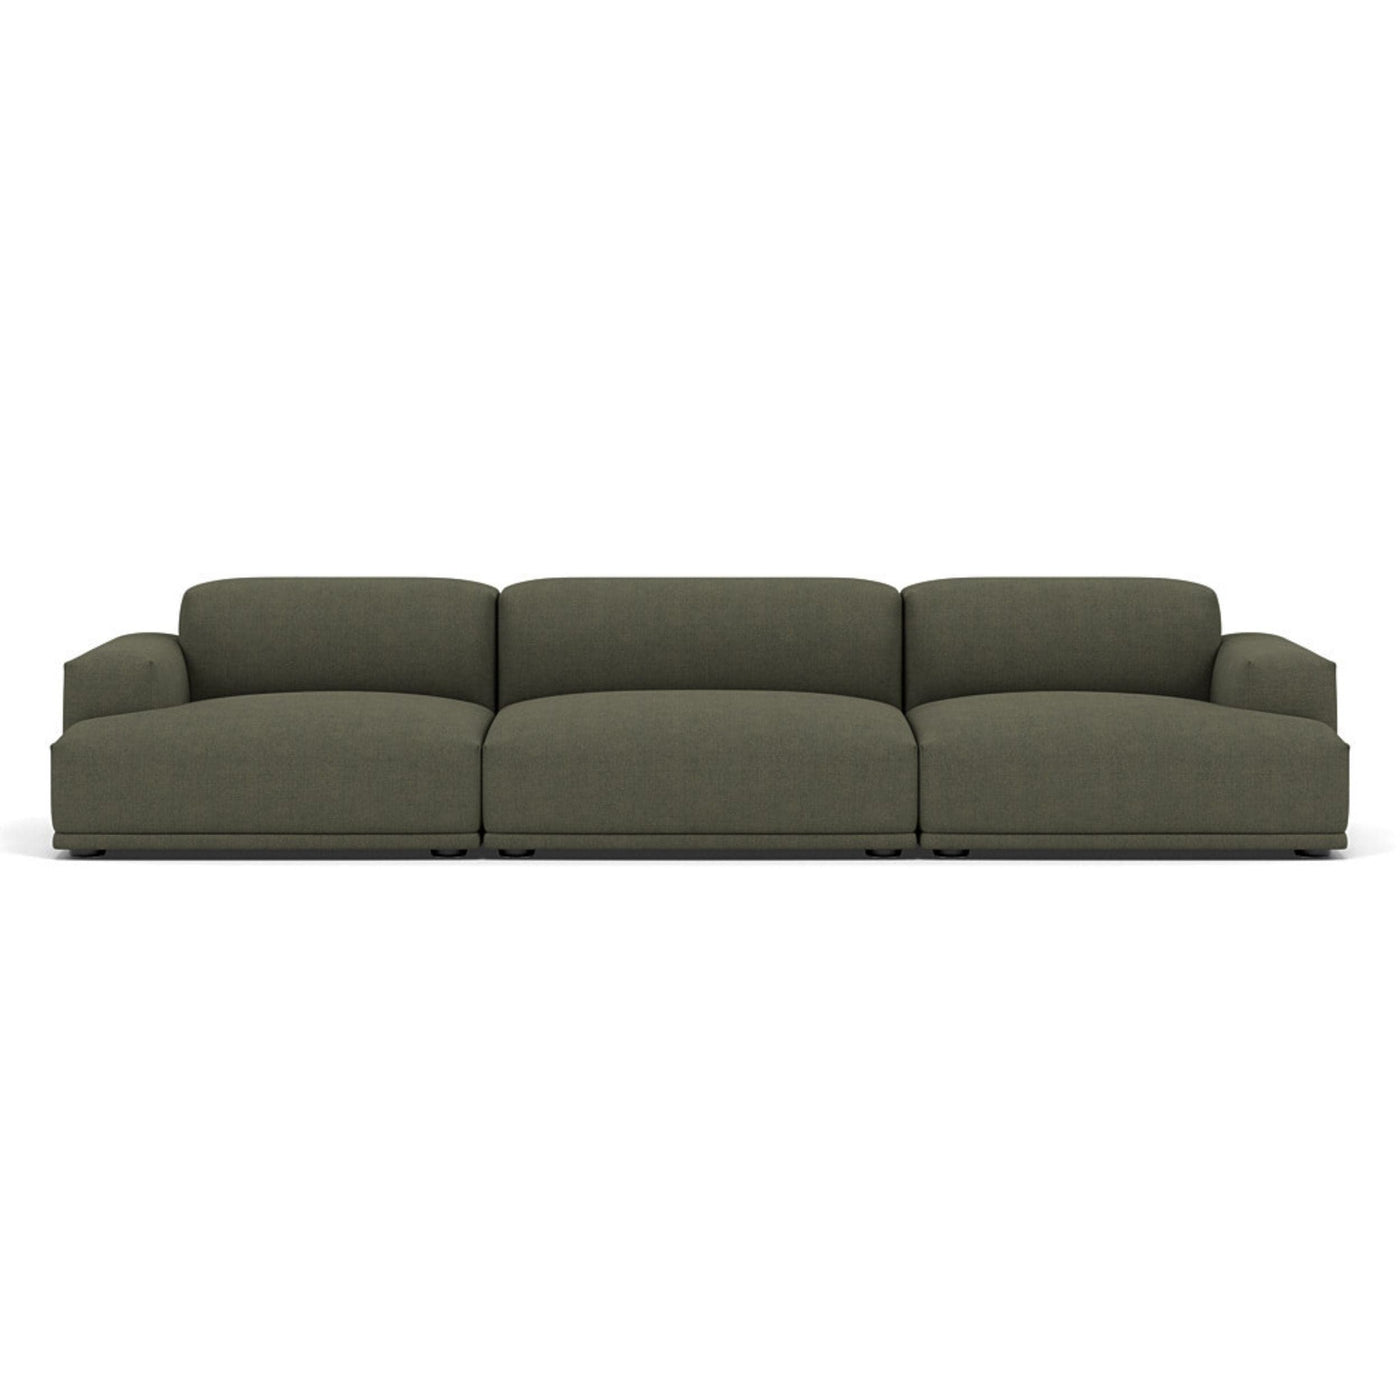 Muuto Connect modular sofa 3 seater in green fabric. Made to order from someday designs. #colour_fiord-961